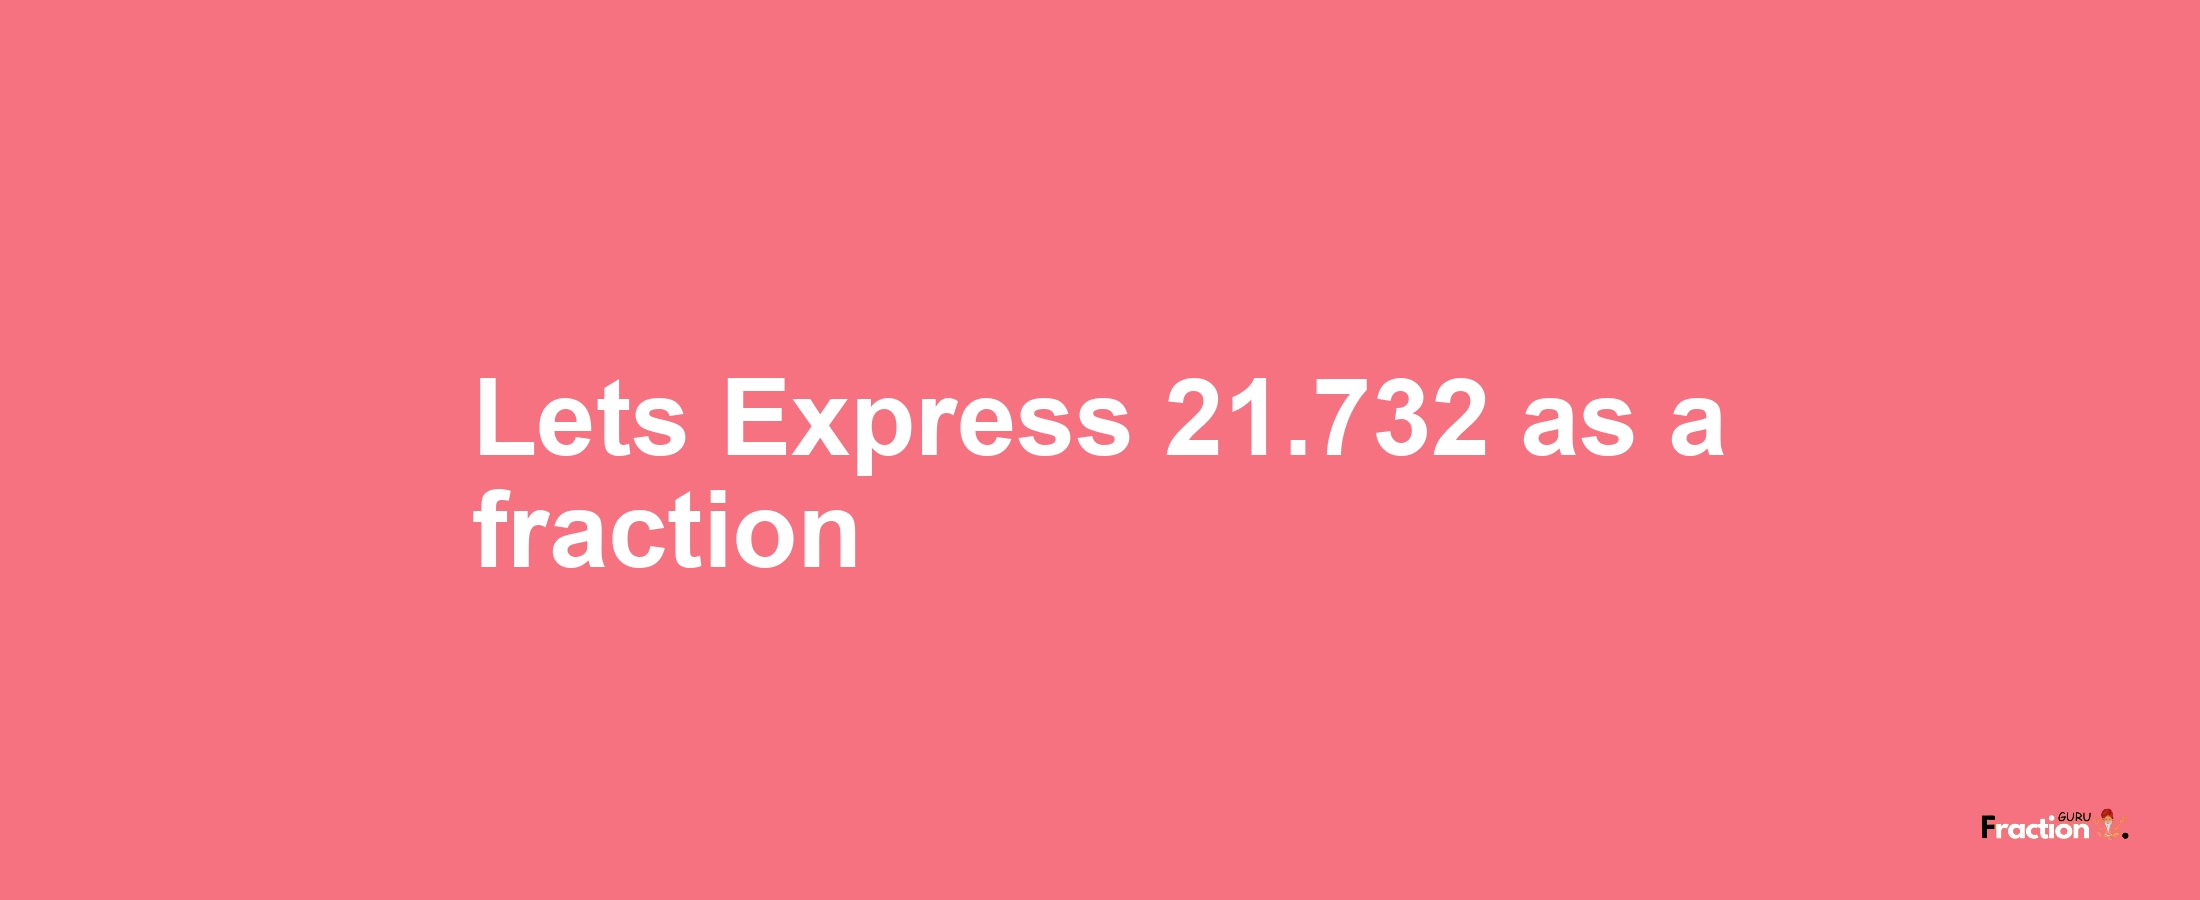 Lets Express 21.732 as afraction